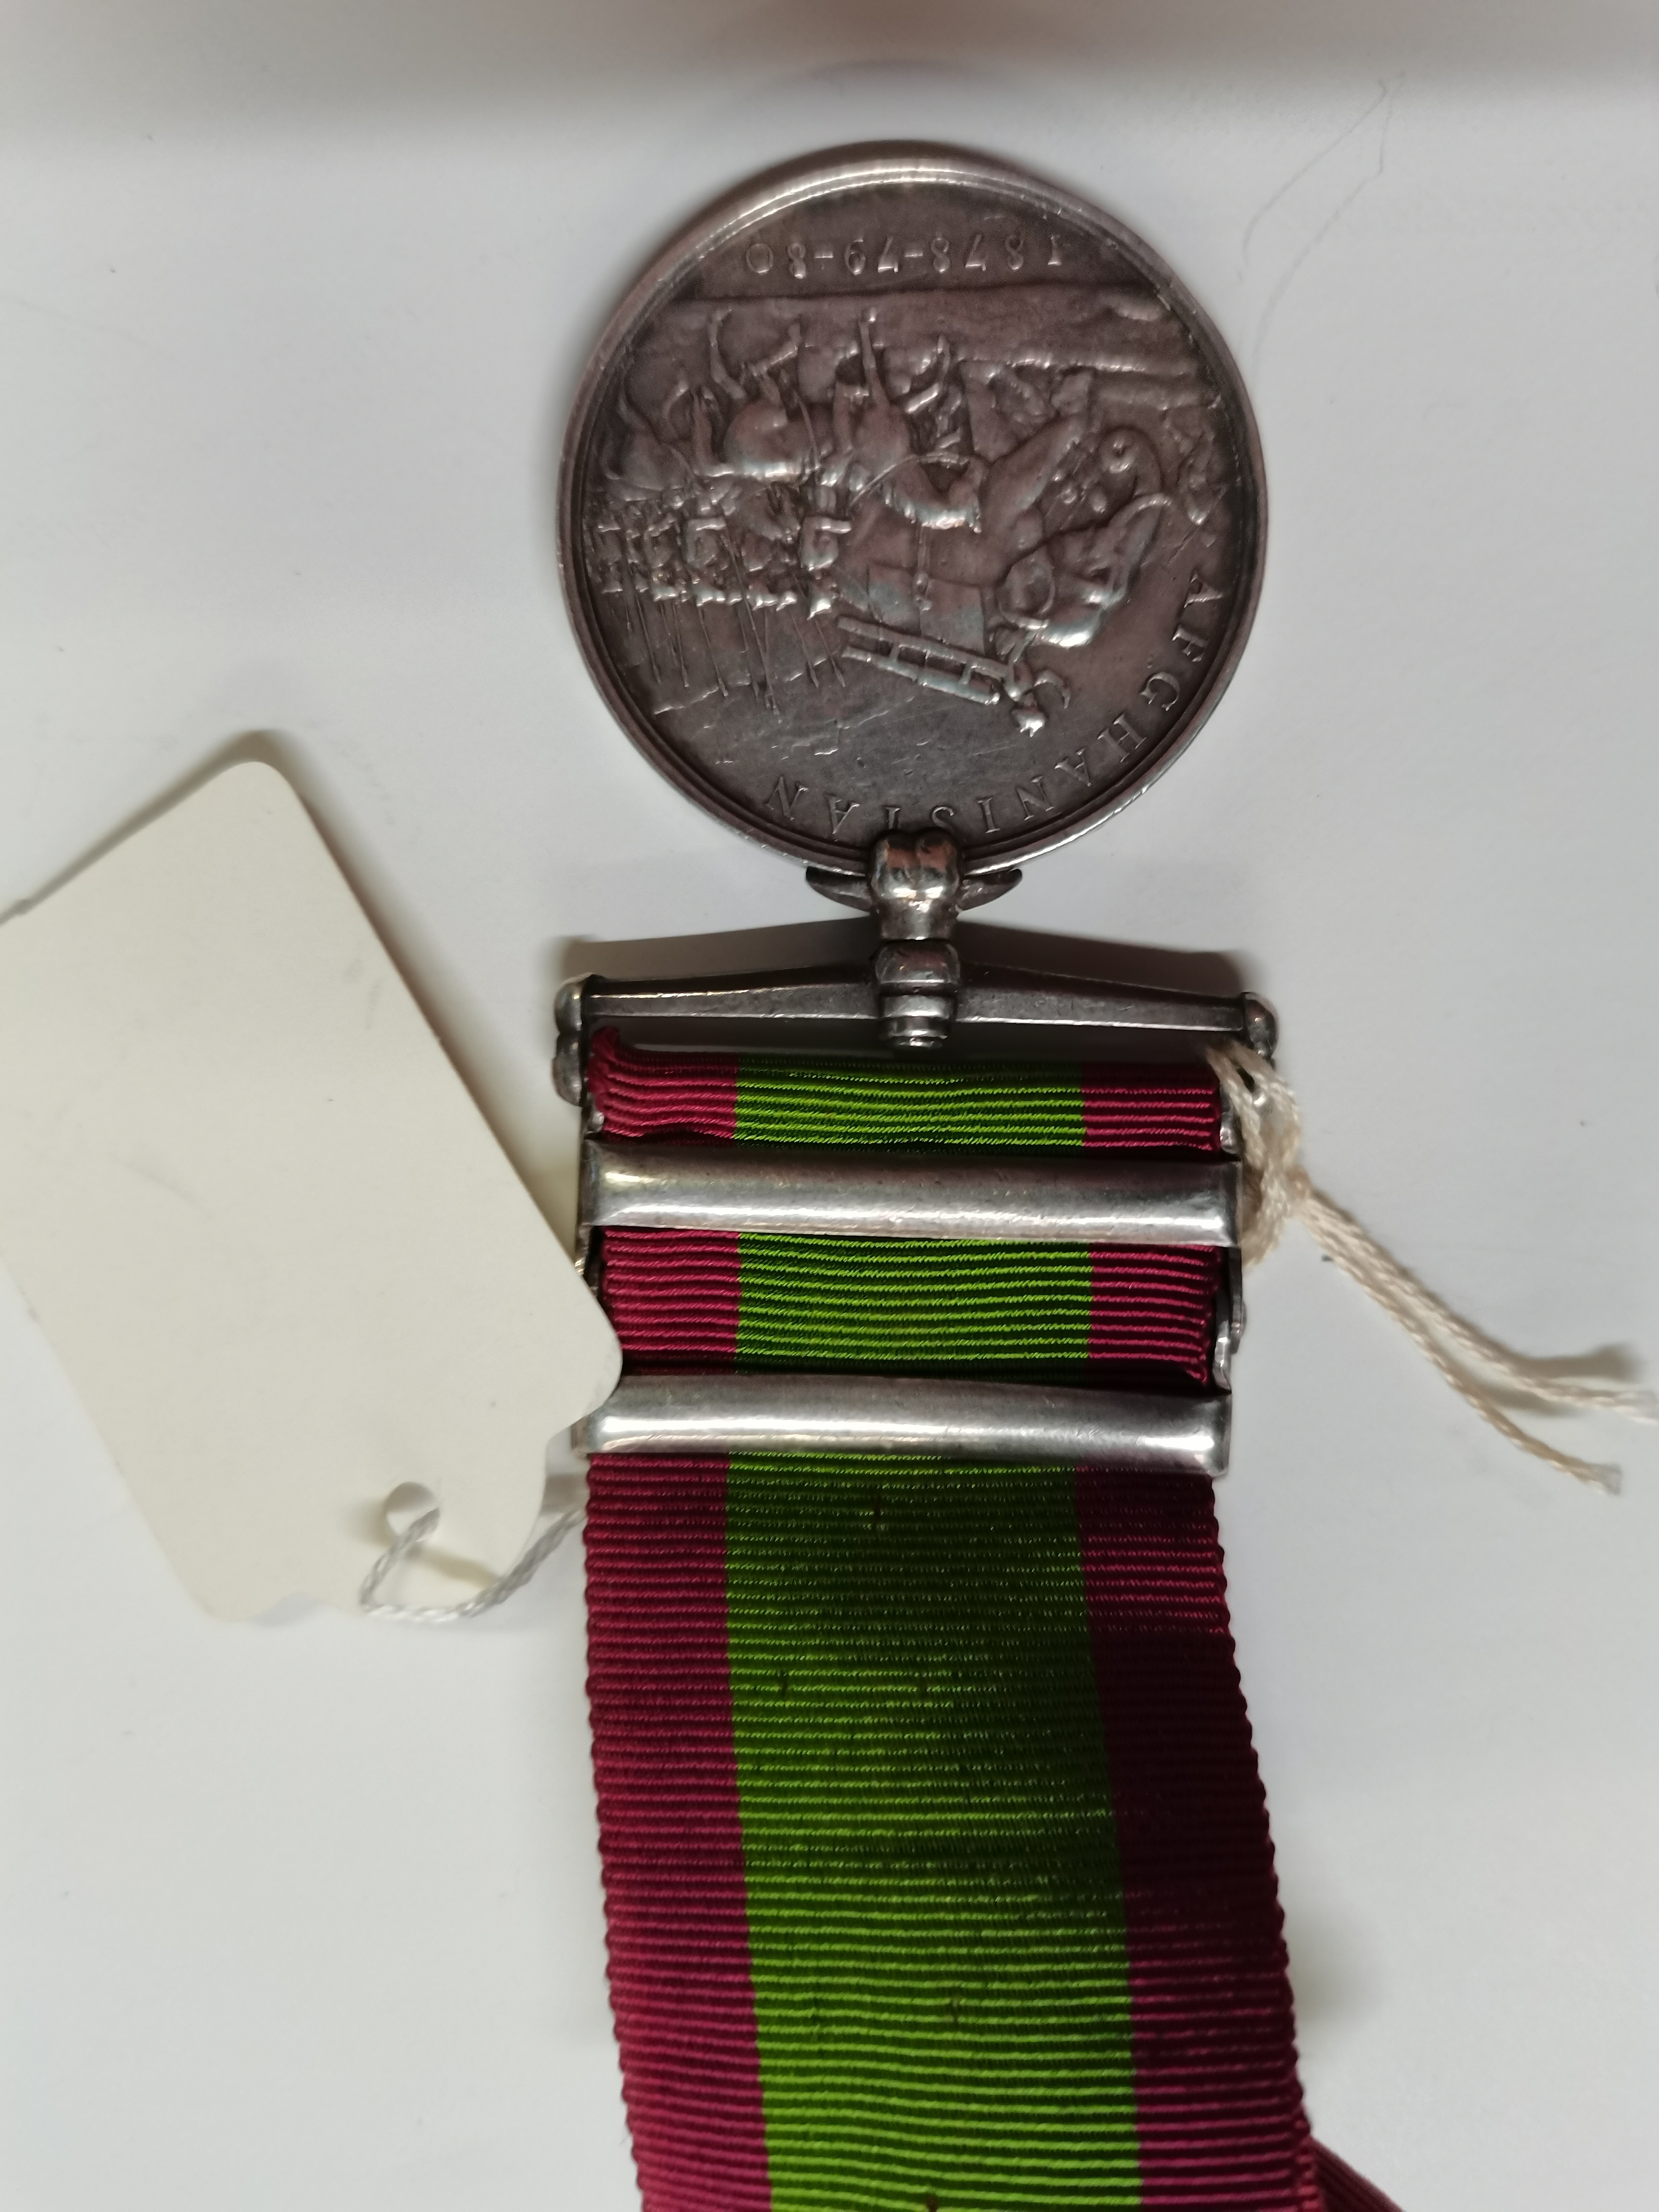 Afganistan 1878 medal with 2 x clasps to 7515 PTE. F. TOE 2/60TH - Image 3 of 4